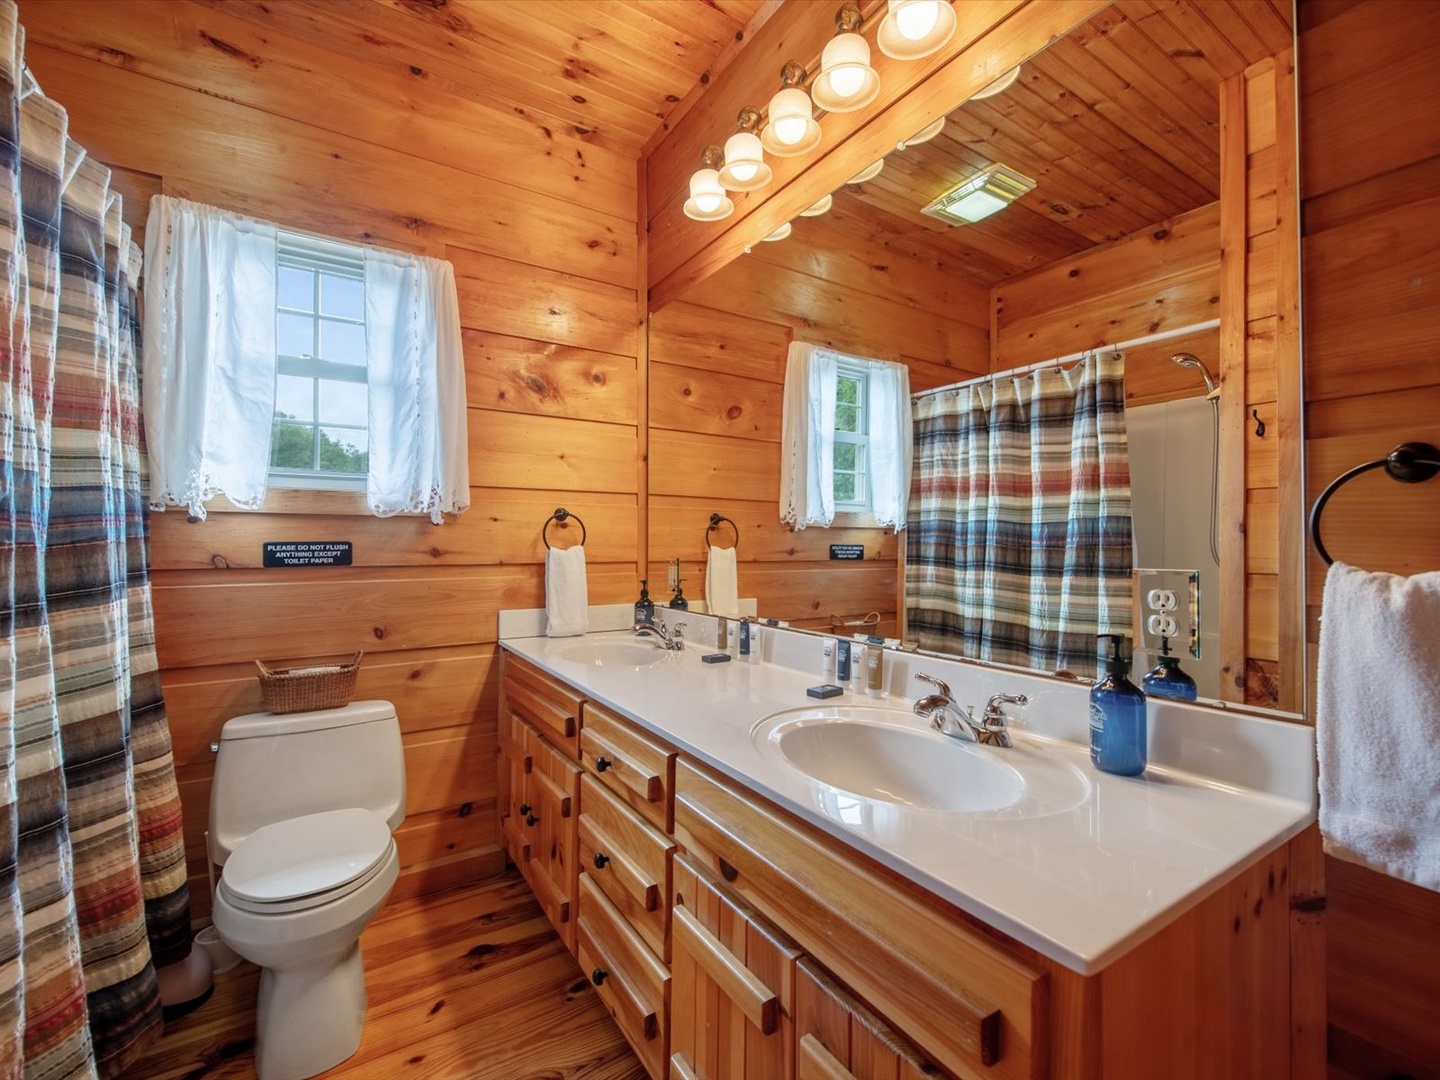 Take Me to the River -Entry Level Master Bathroom